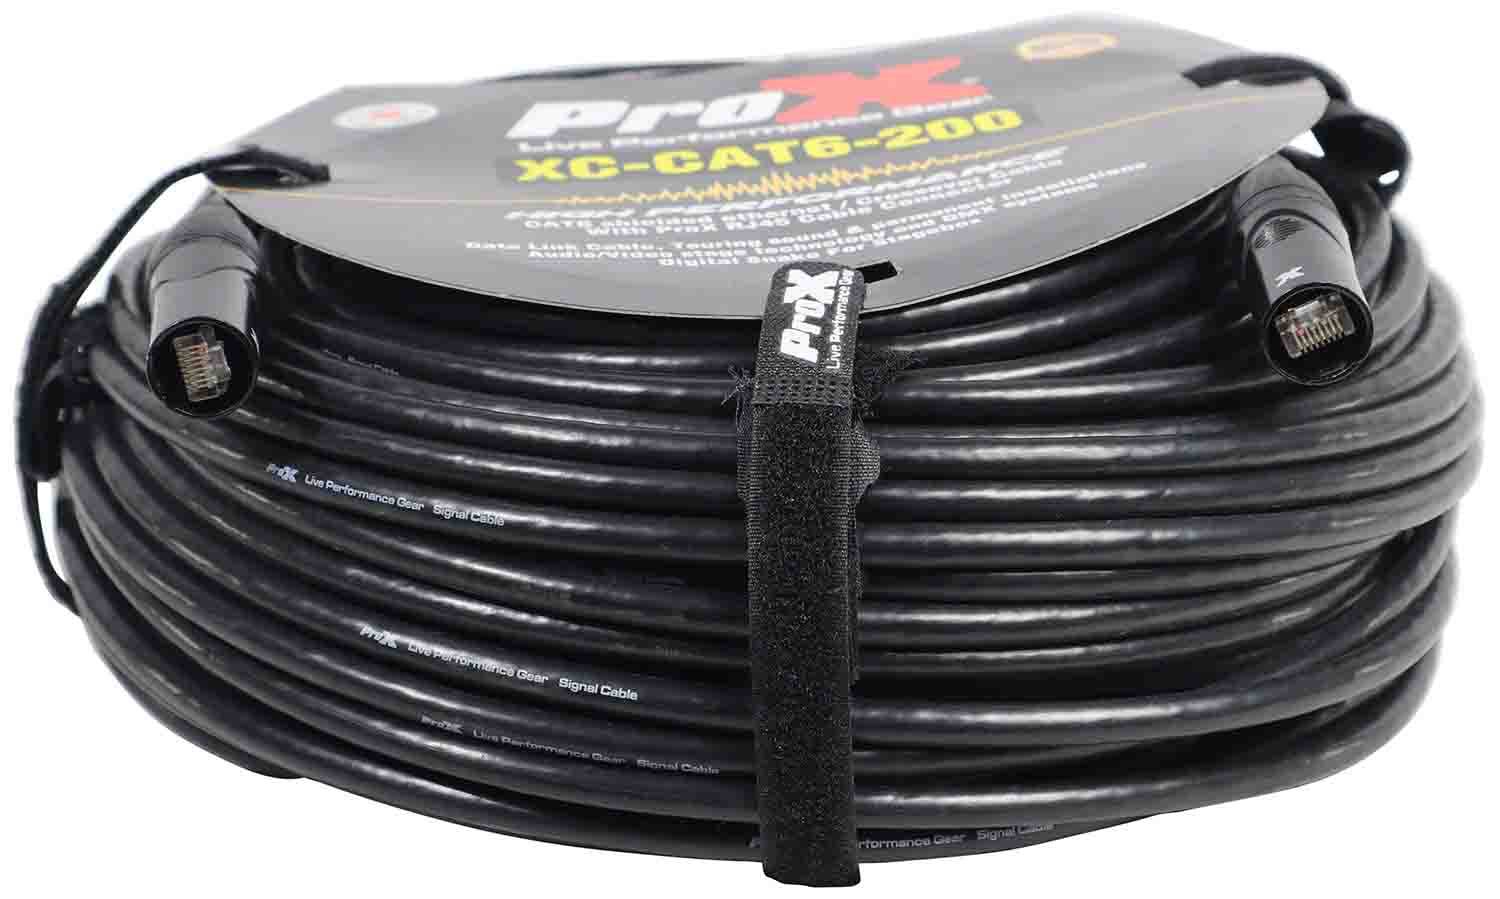 Prox XC-CAT6-200 STP Cat 6 Cable W-RJ45 for Network and Snake Box Connections - 200 Feet - Hollywood DJ